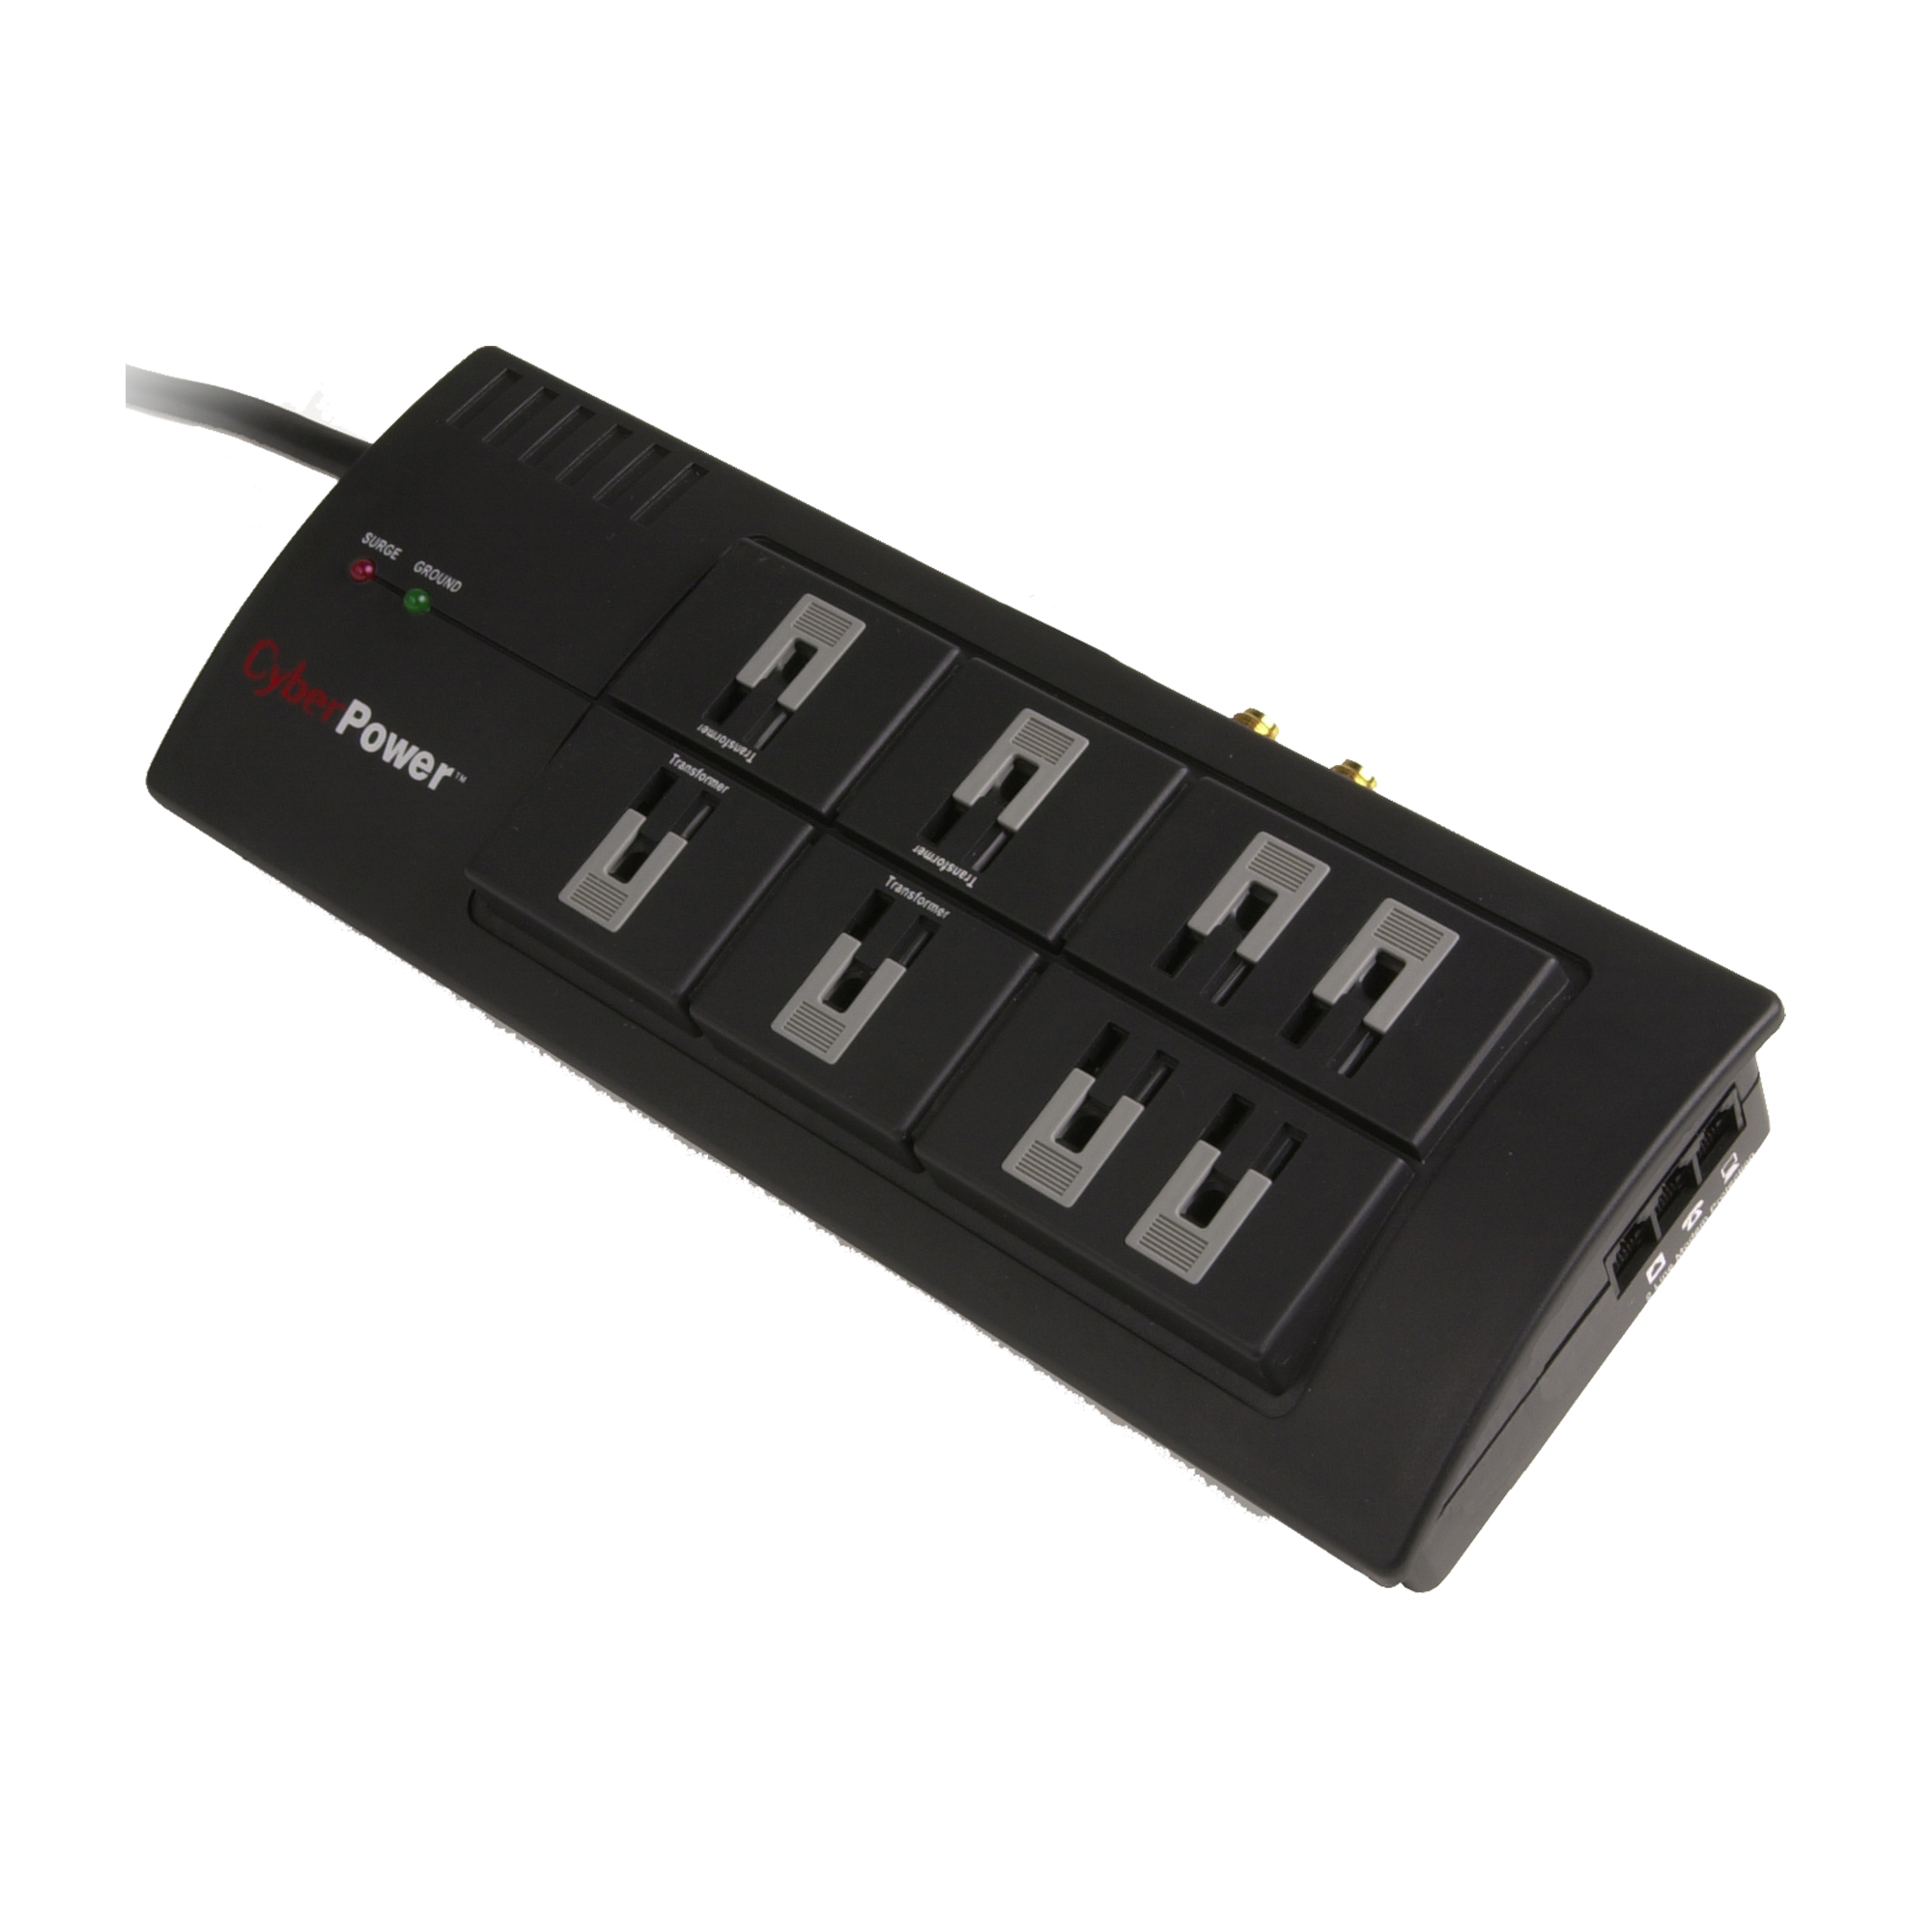 880 Surge Protector Cyber POWER Model 